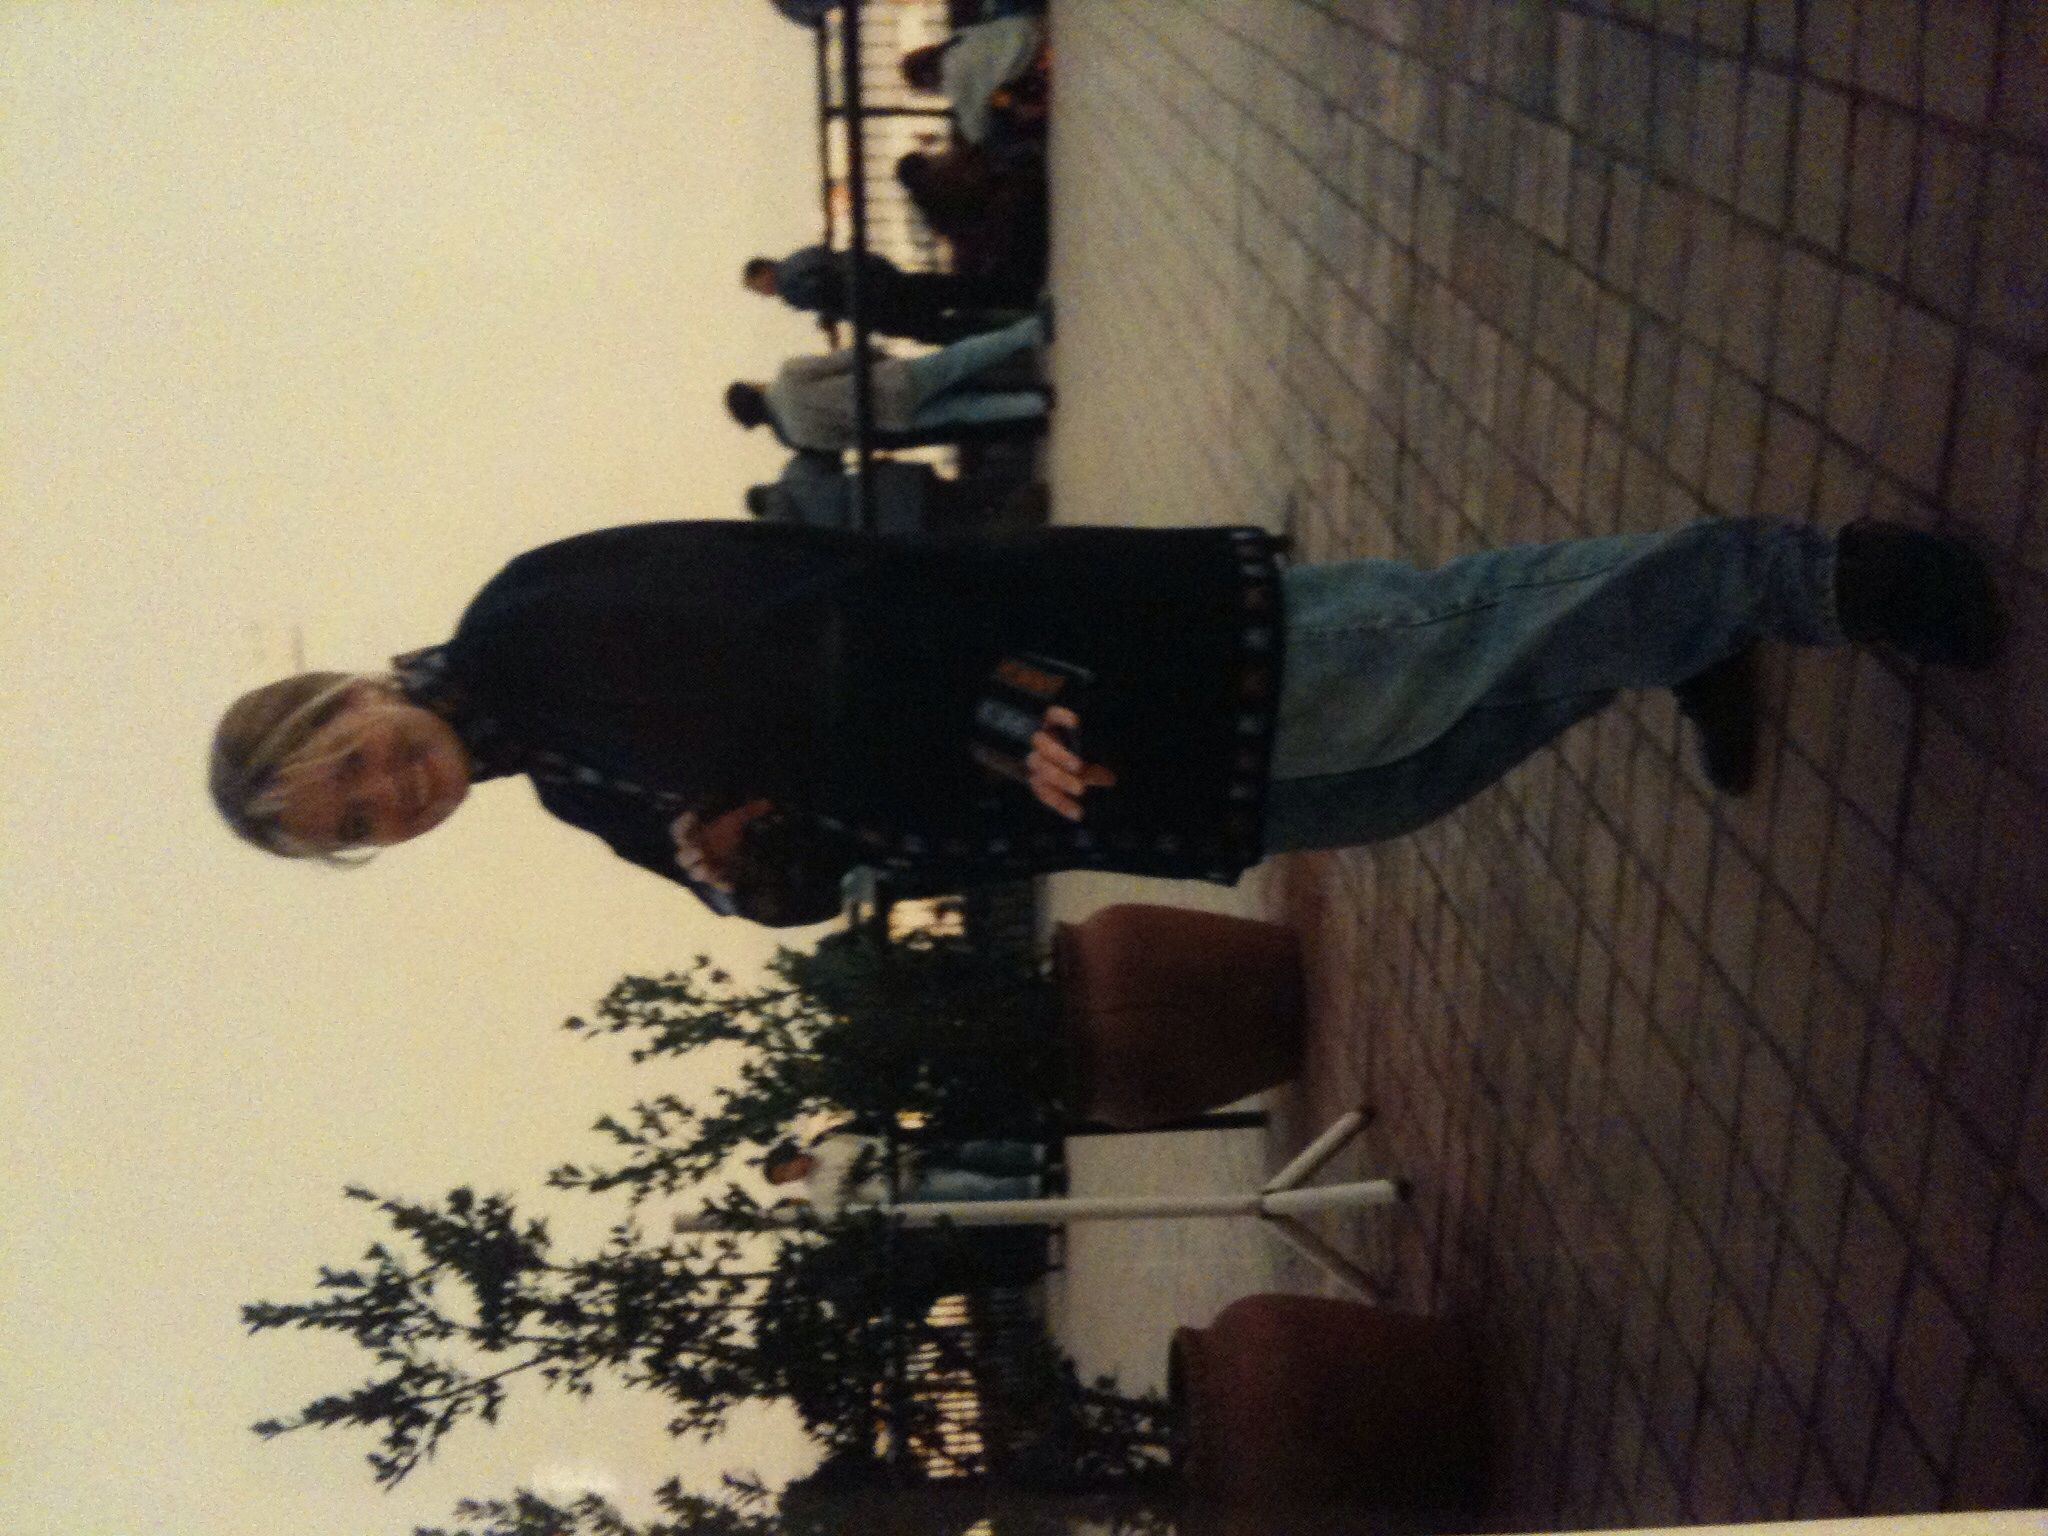 1994 - Kathmandu, Nepal -  Just picked up my awesome wool coat that I designed and had made overnight.